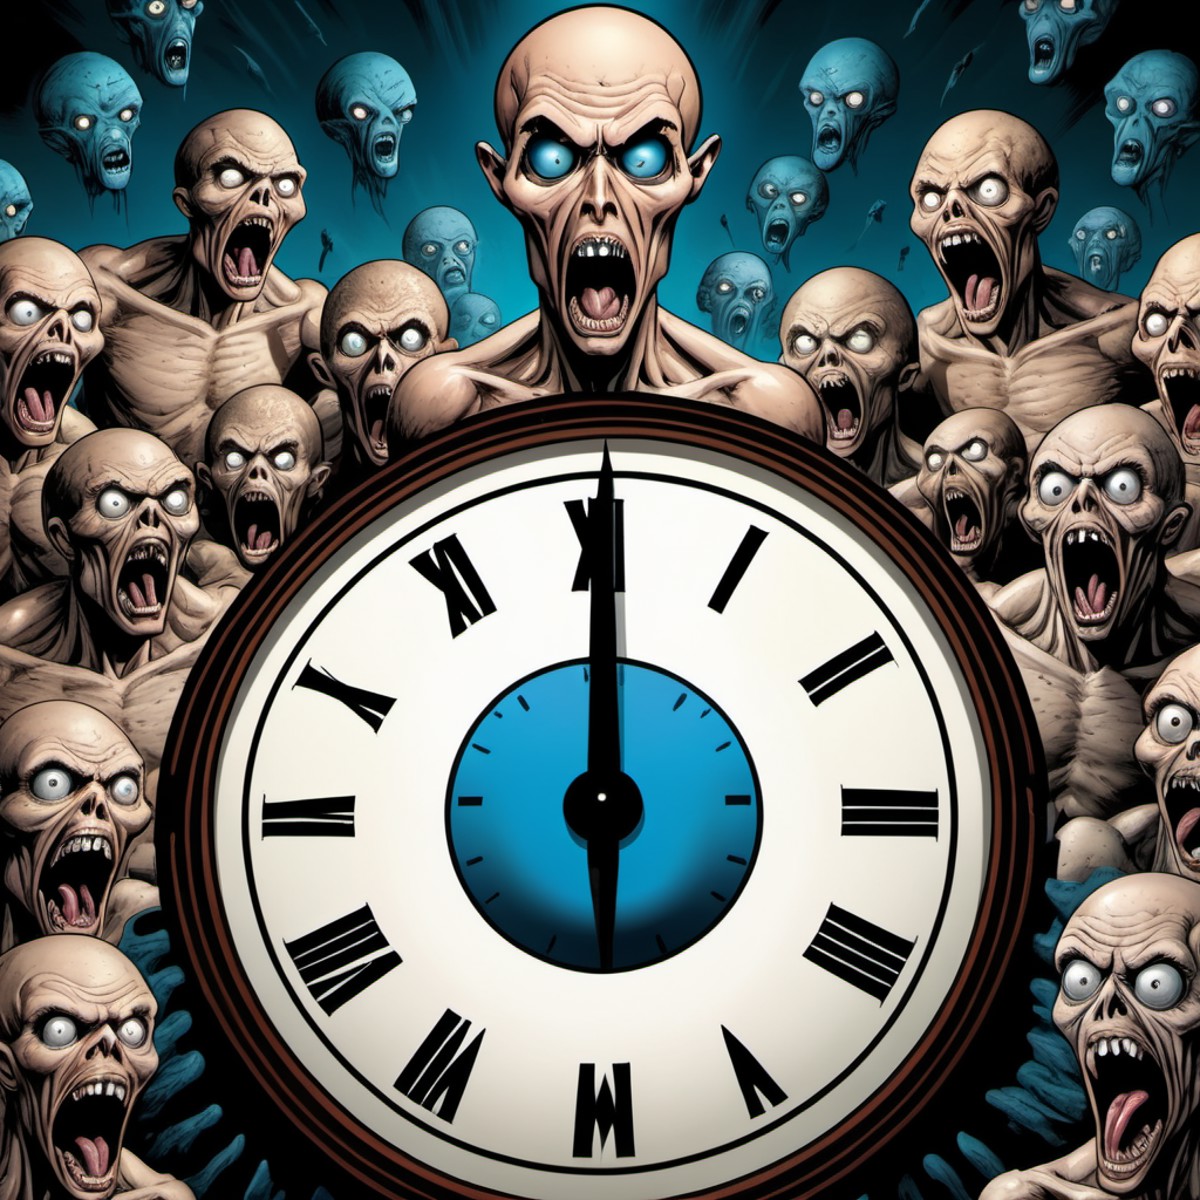 doomsday clock, hyper-detailed satiric graphic illustration, scared aliens screaming